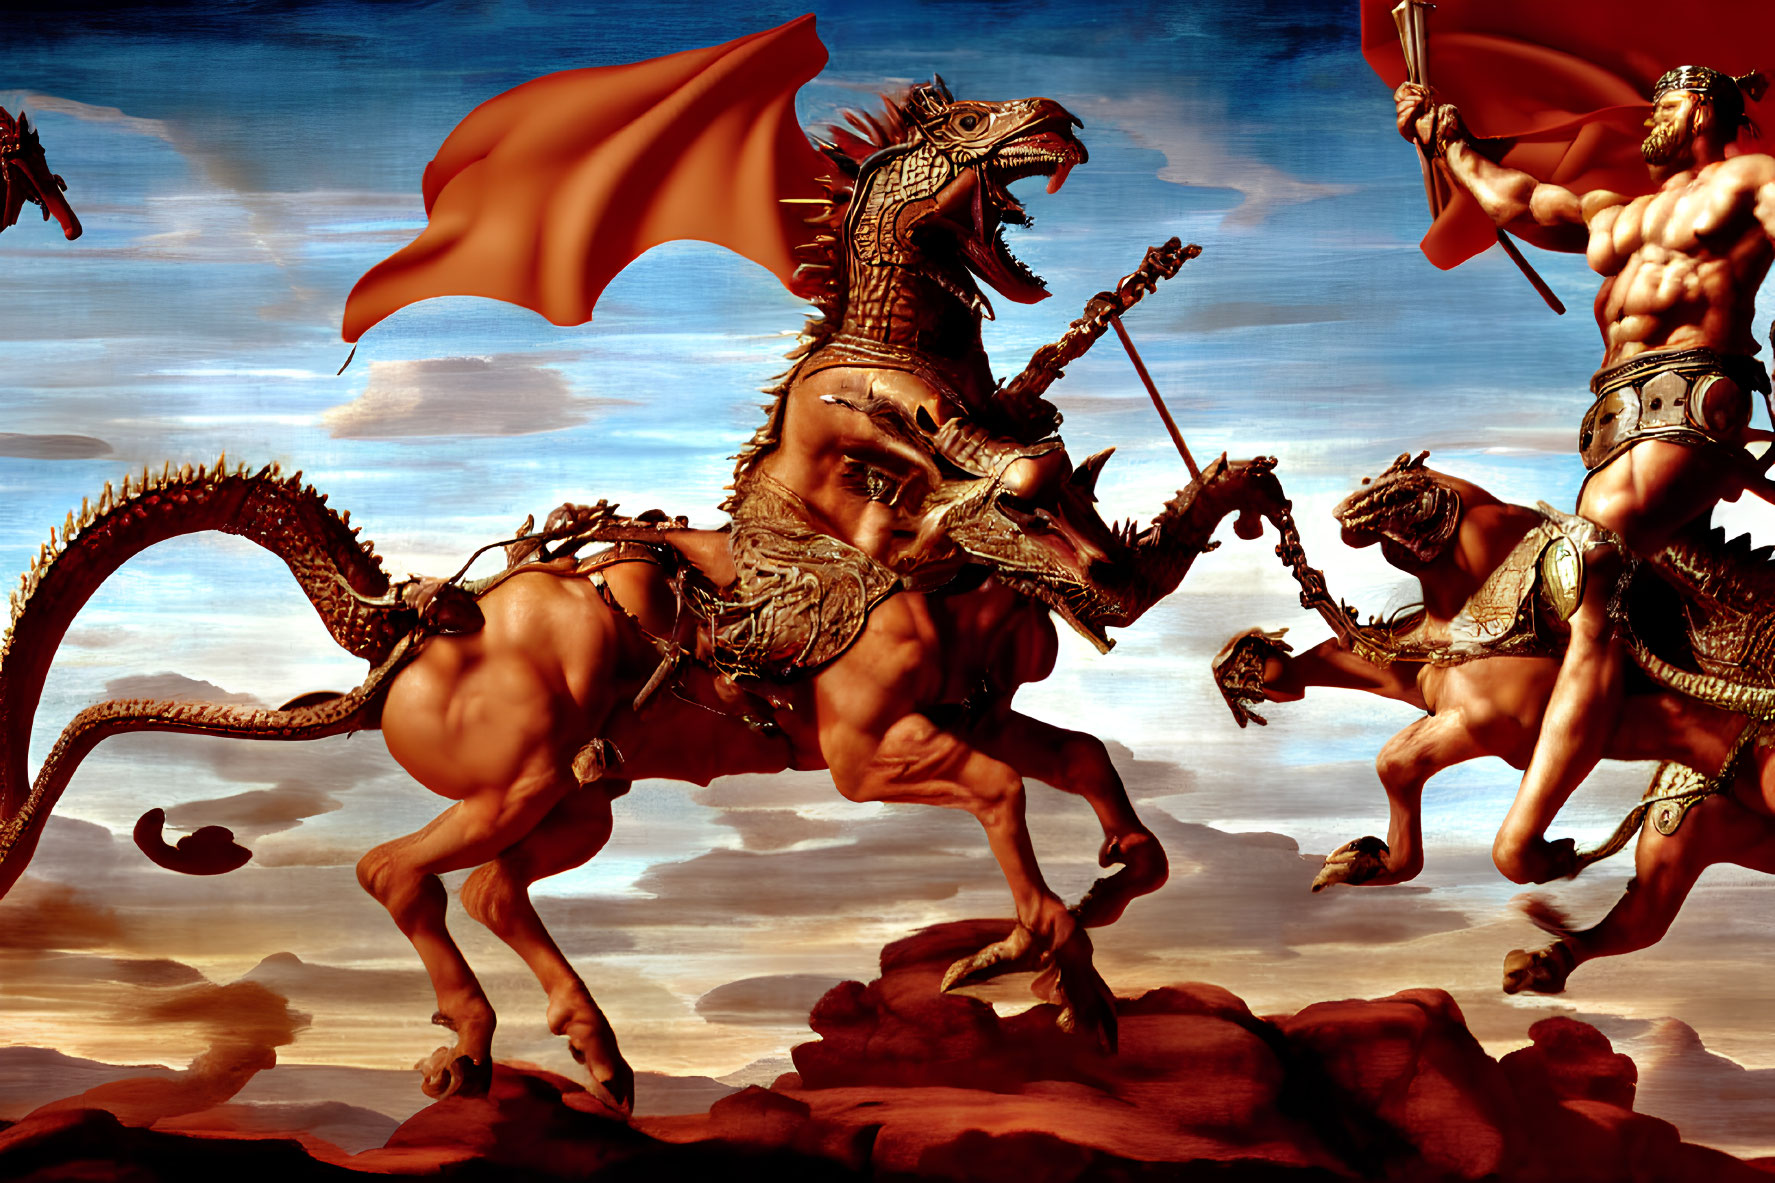 Warriors riding dragon-like creatures in a dramatic sky